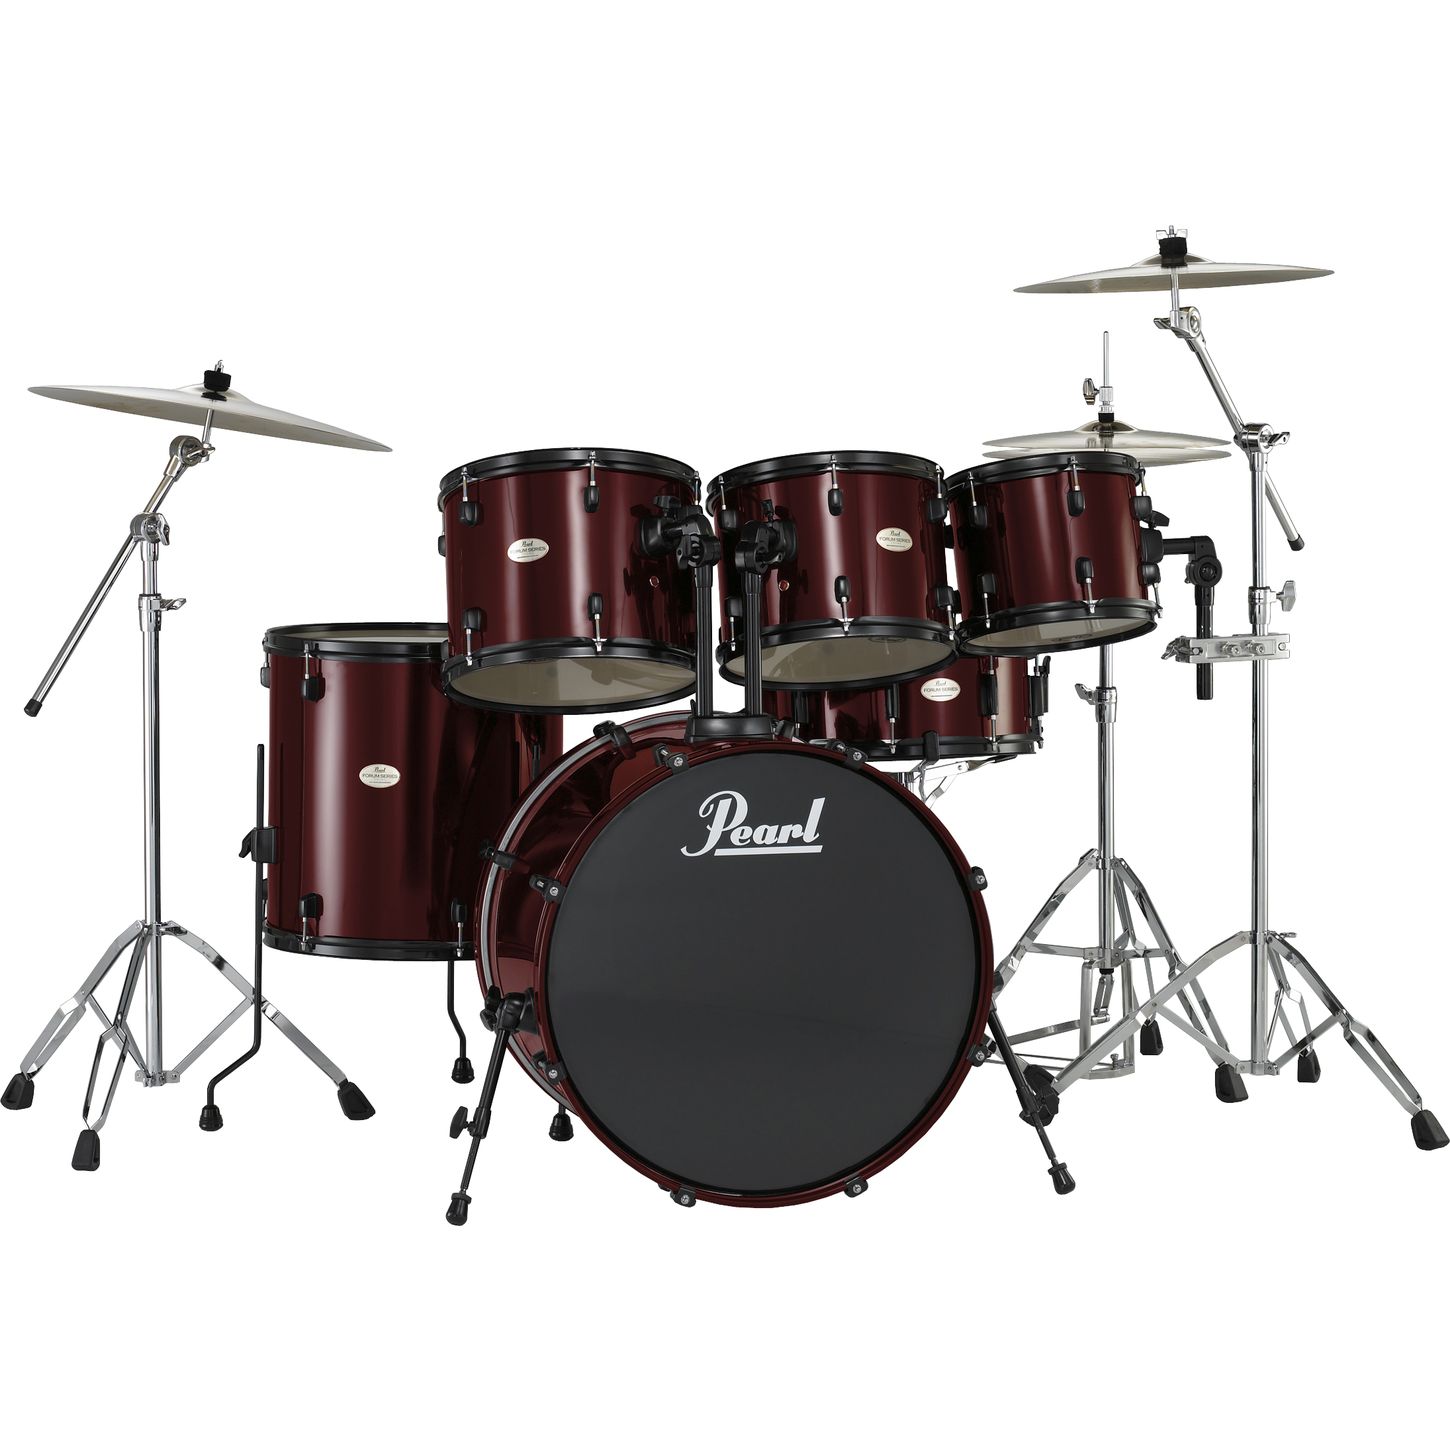 Pearl forum 5-Piece Drum Set with Free 10" Tom | Musician ...